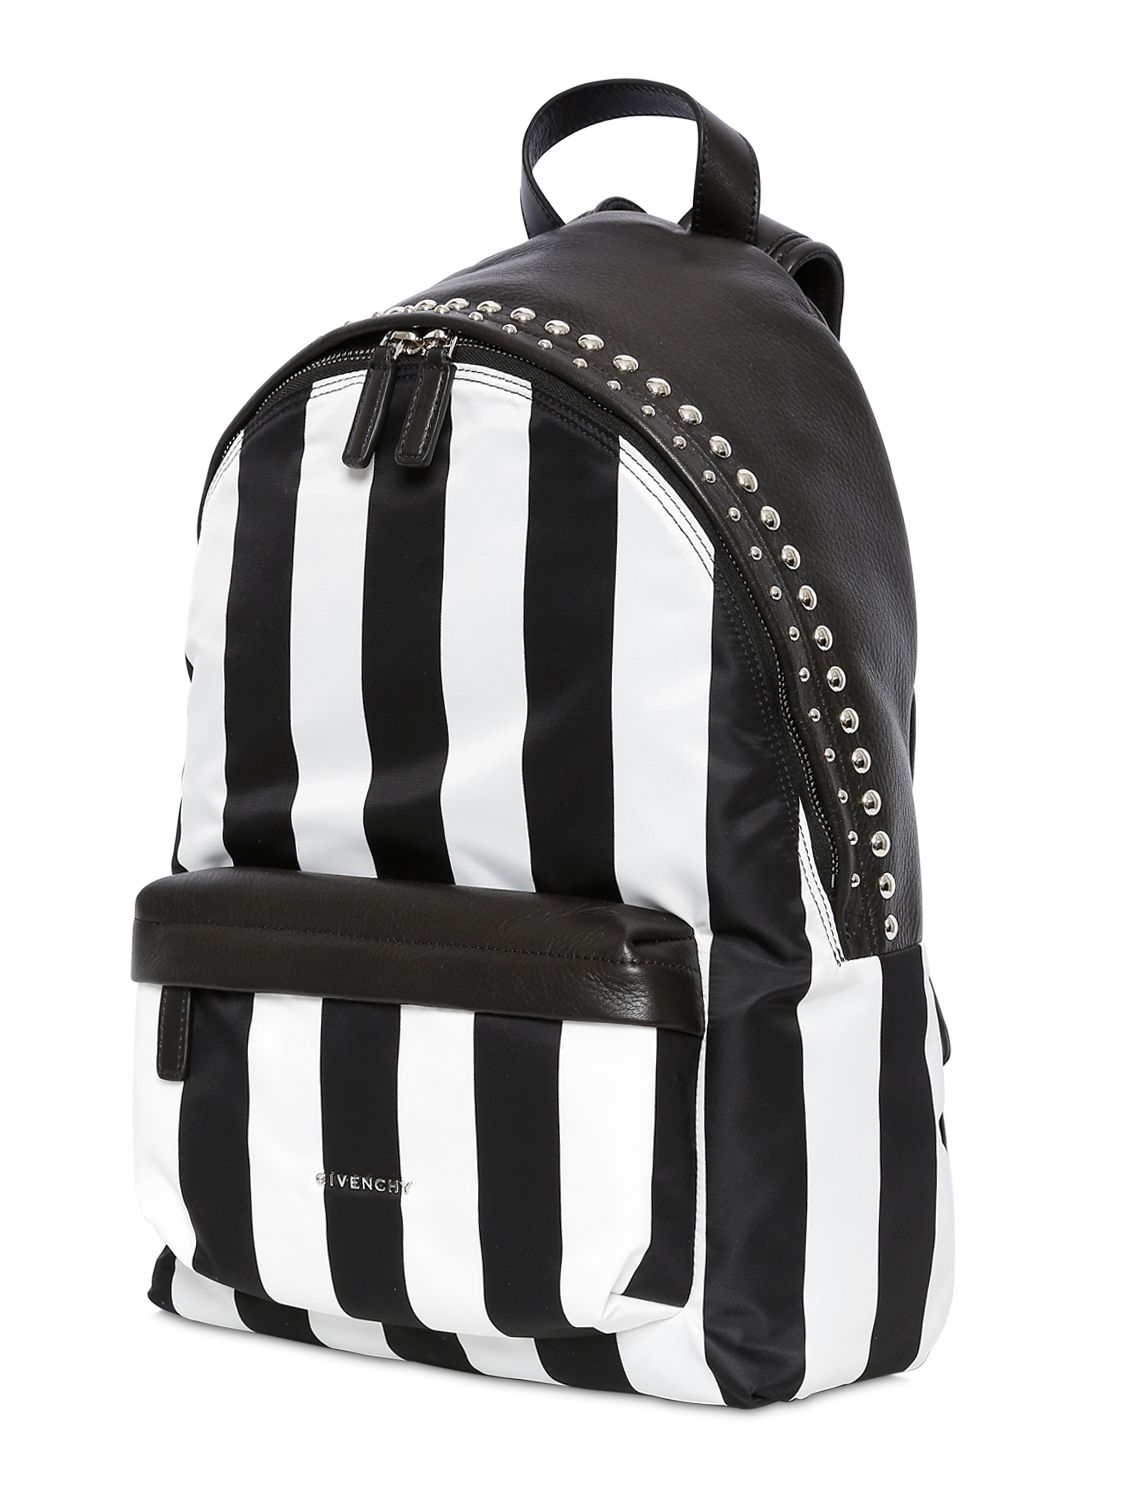 Givenchy Striped Cotton Canvas & Leather Backpack in Black for Men - Lyst